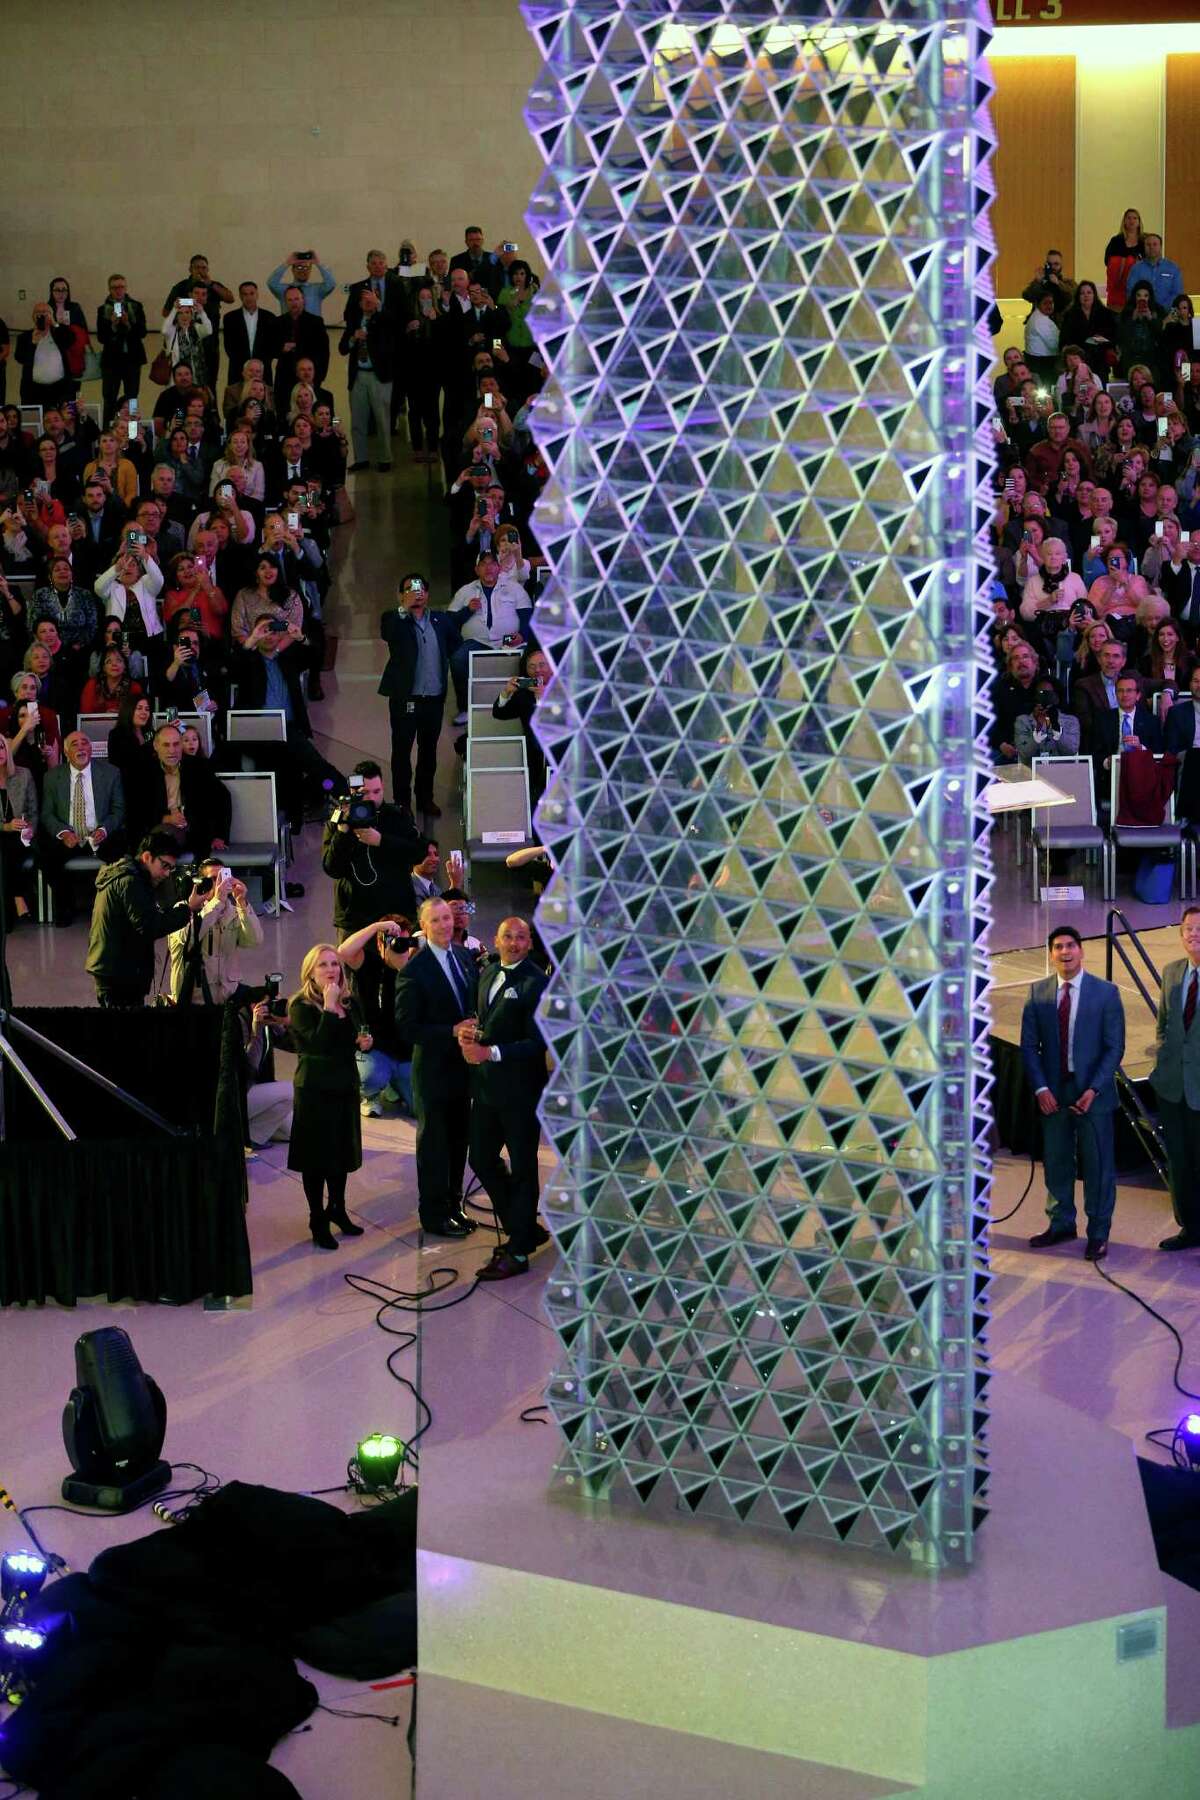 2. The 30-foot-tall art installation "Liquid Crystal" in the lobby (the "cheese grater"): $987,500. The budget for this didn’t change during the project. The cost included $55,633 for travel expenses, $60,000 for a prototype and $679,000 for the construction and installation of the final artwork.